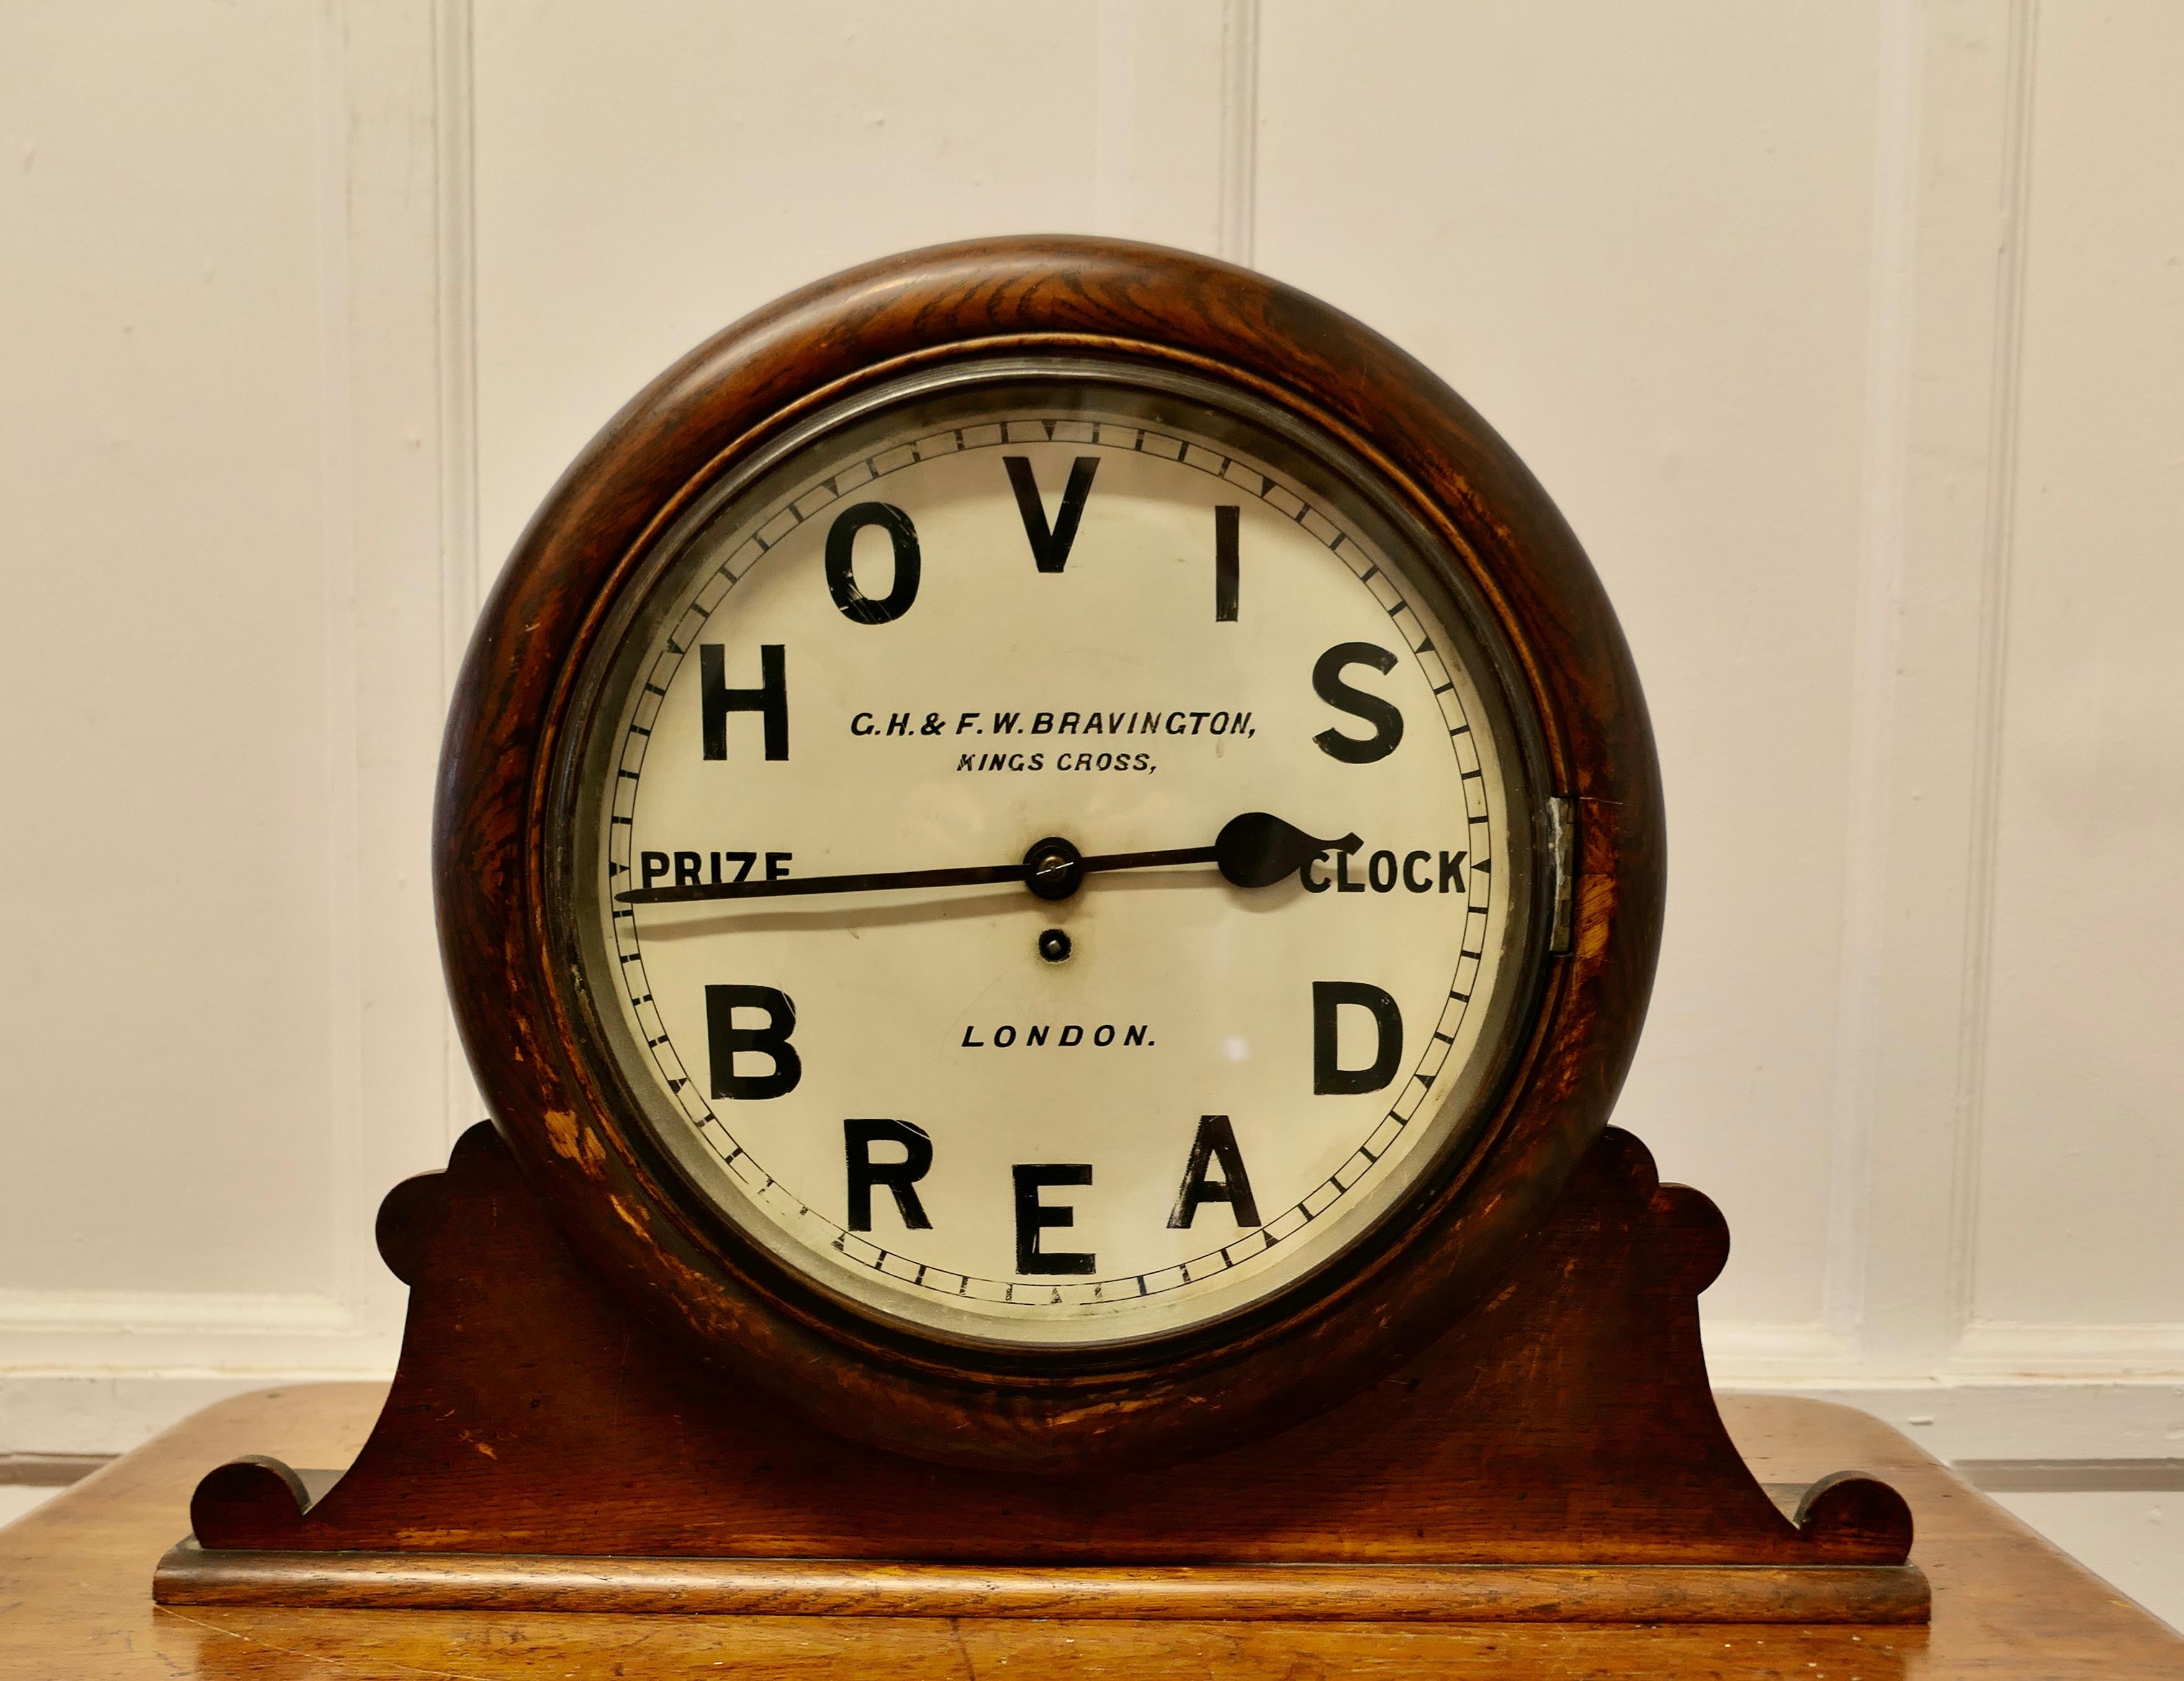 Original HOVIS Prize Clock by G.H.& F.W. Bravington London

Clocks like this one were won by Bakery shops and presented by Hovis, this was a very prestigious award for the recipient
Made by Bravingtons and Designed as a Wall Clock this on is